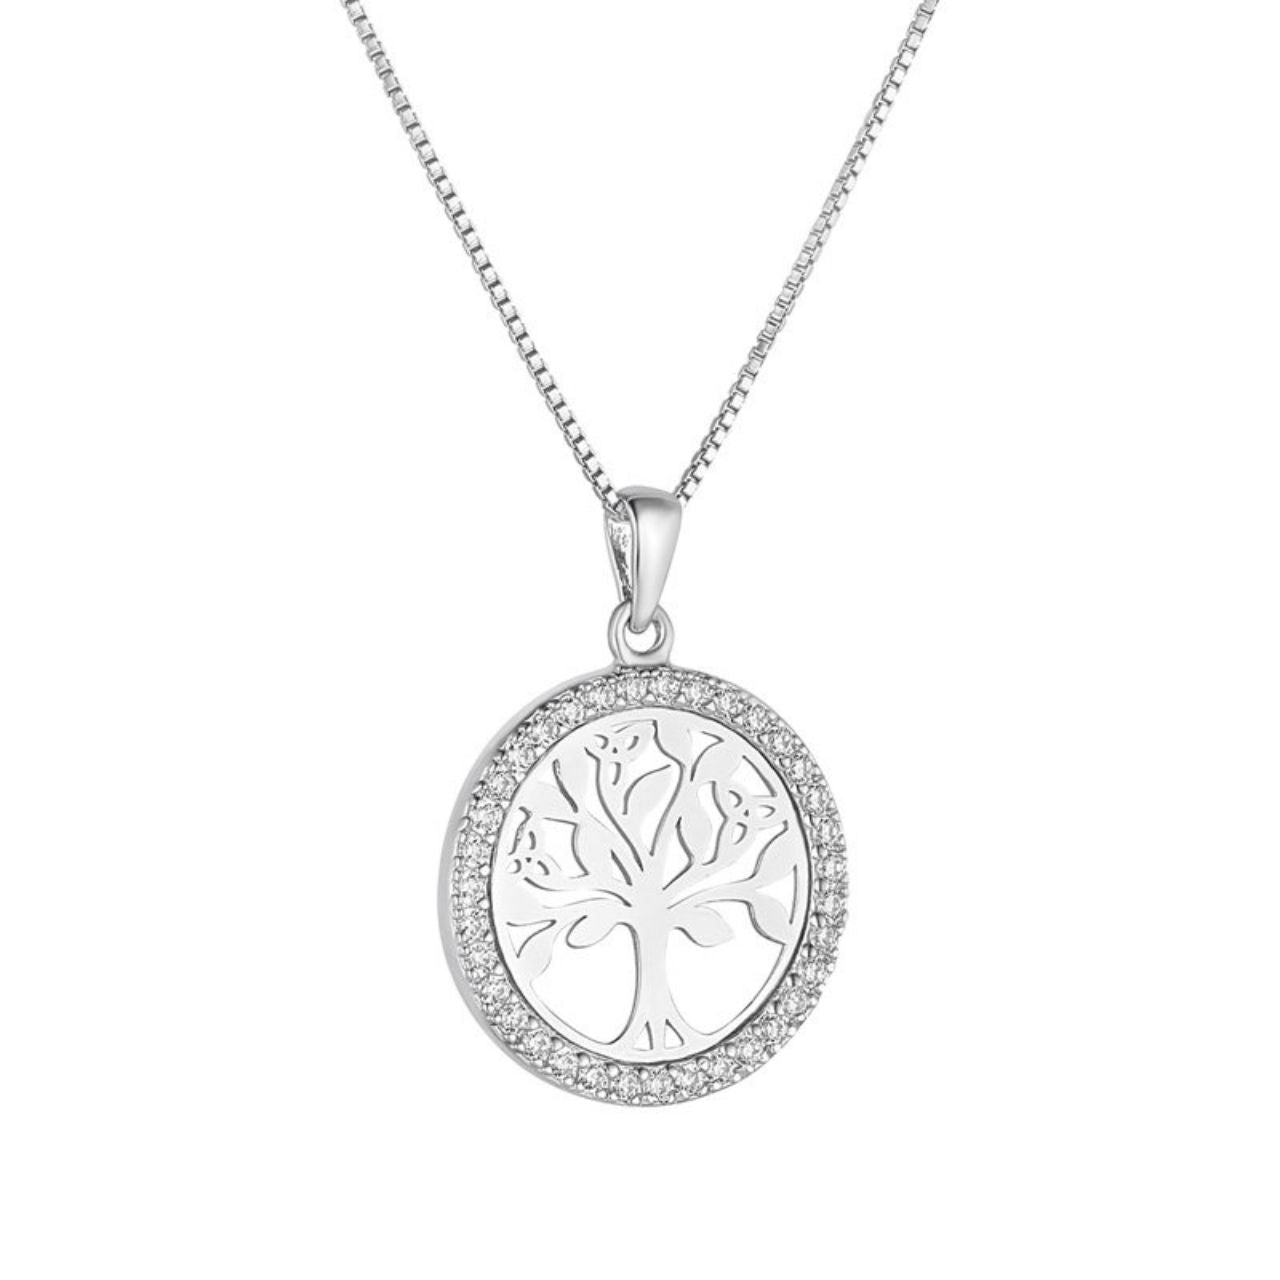 Sterling Silver CZ Round Tree Of Life Necklace  Crafted in sterling silver, this Tree of Life necklace sits in the centre of a ring of cubic zirconia. The Tree of Life is a famous Irish symbol which represents balance, harmony and rebirth. A chic look that will brighten up any neckline.